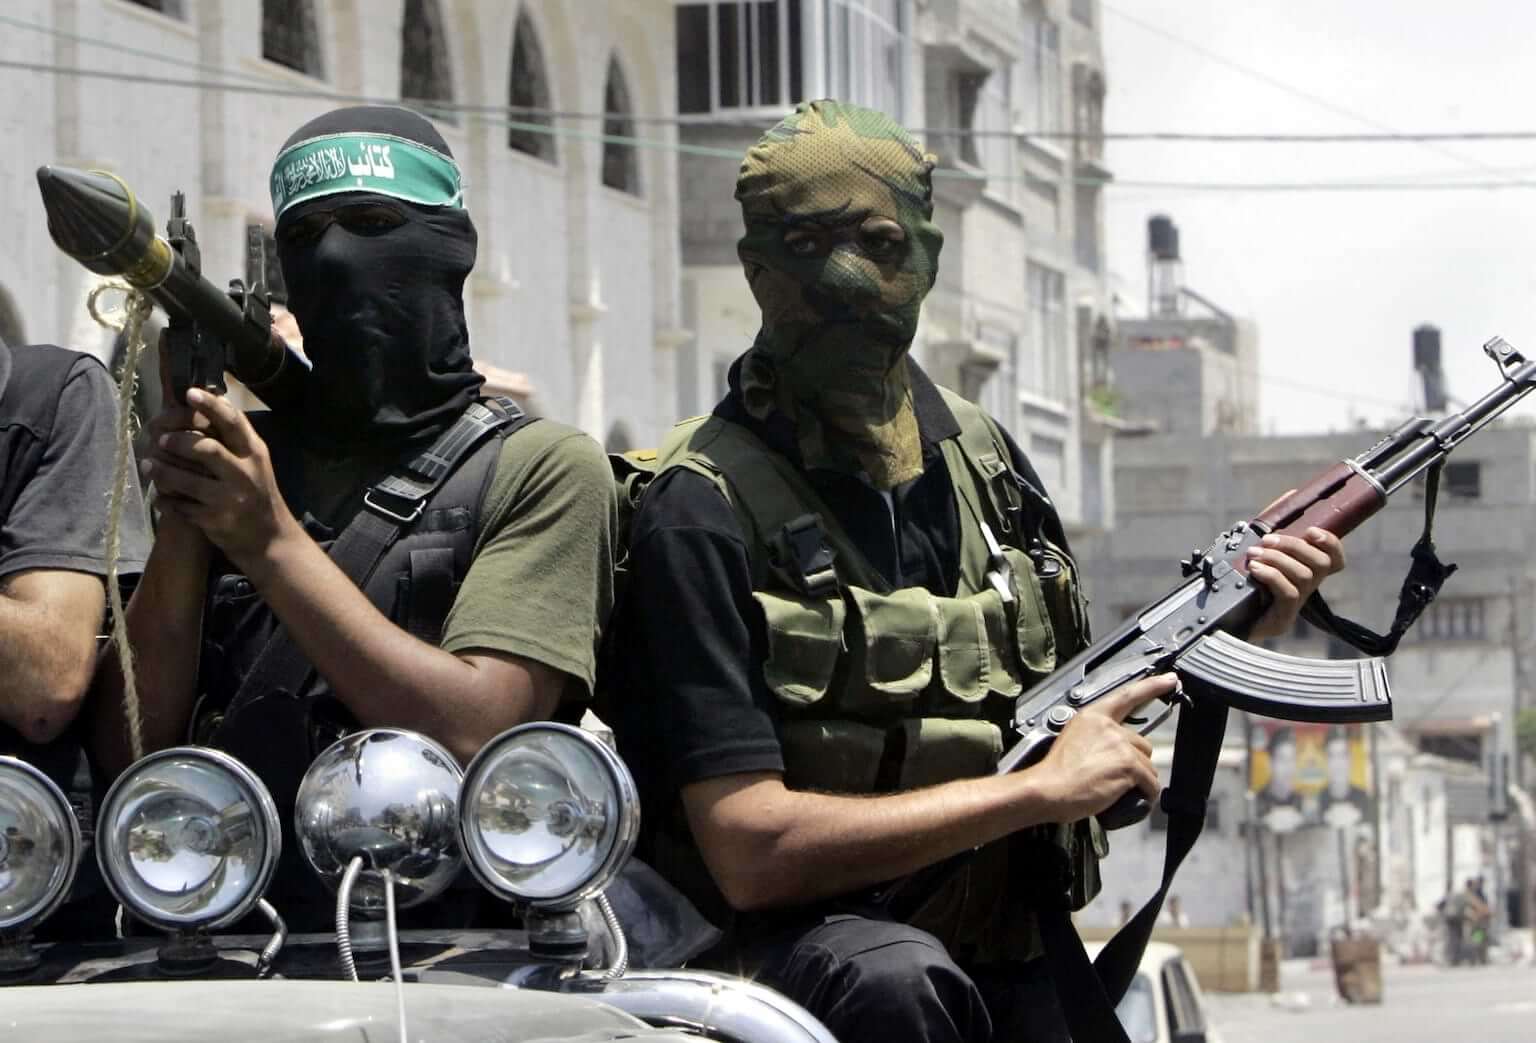 FILE - Palestinian militants from Hamas ride on a truck with their weapons during the funeral of militant Emad Abu Kados who was killed during clashes with Fatah gunmen in the Sheikh Radwan neighborhood in Gaza City, June 13, 2007. (AP Photo/Hatem Moussa, File)